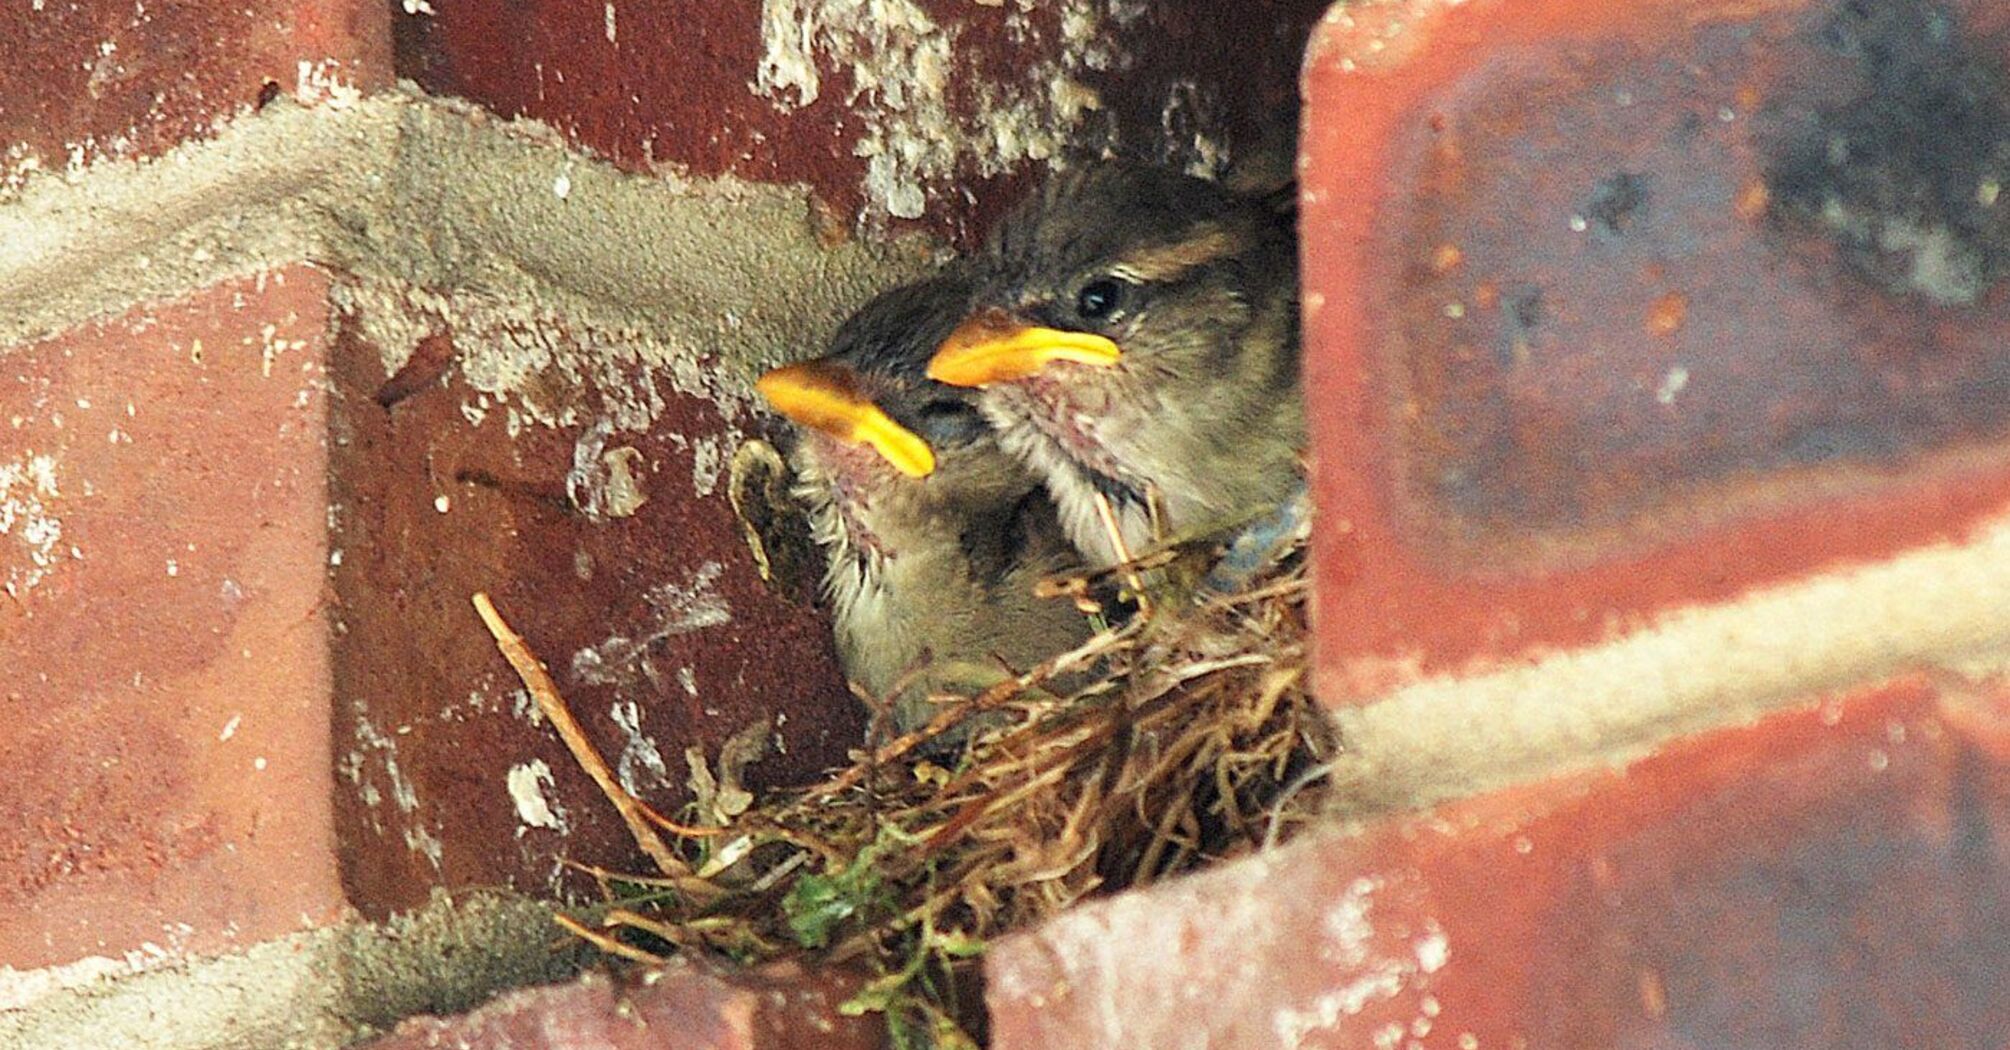 What does it mean if a bird has made a nest near the house or on the balcony